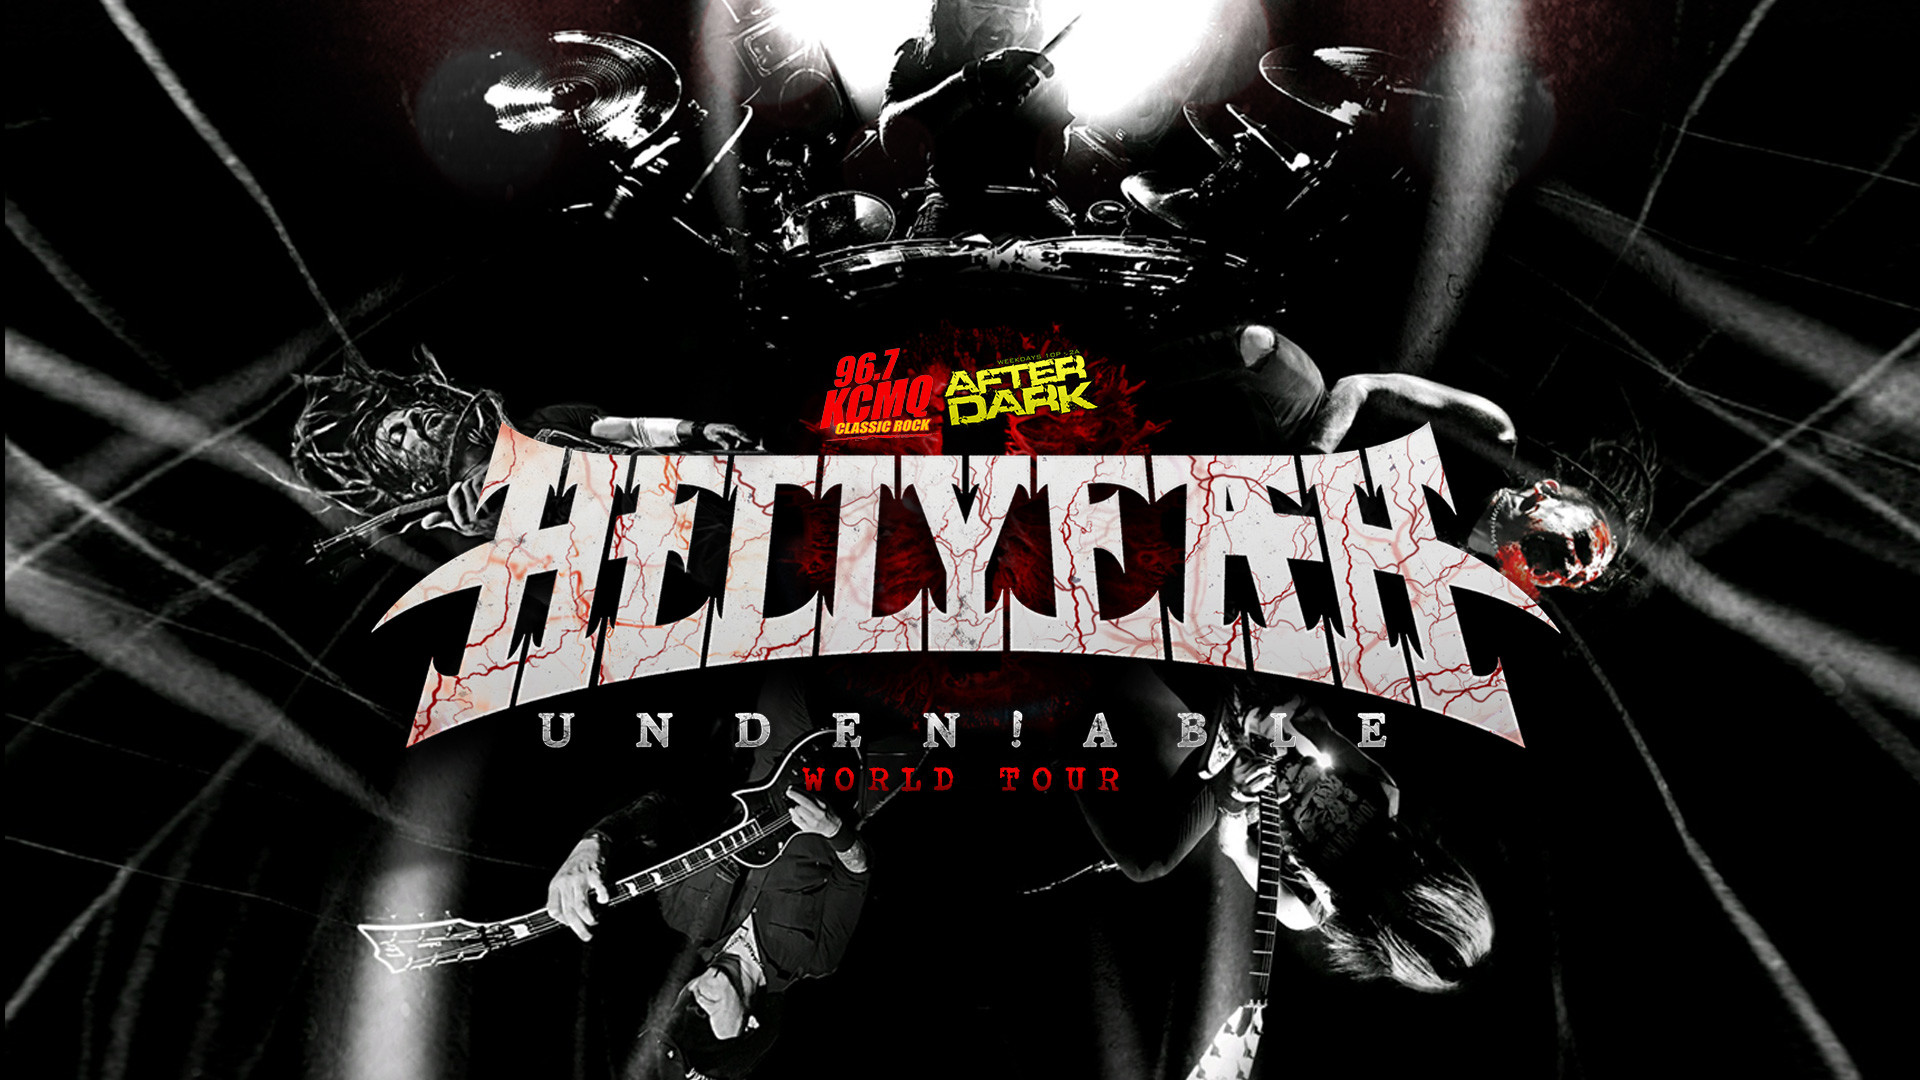 1920x1080 KCMQ After Dark Welcomes HELLYEAH To The Blue Note - 96.7 KCMQ Classic Rock